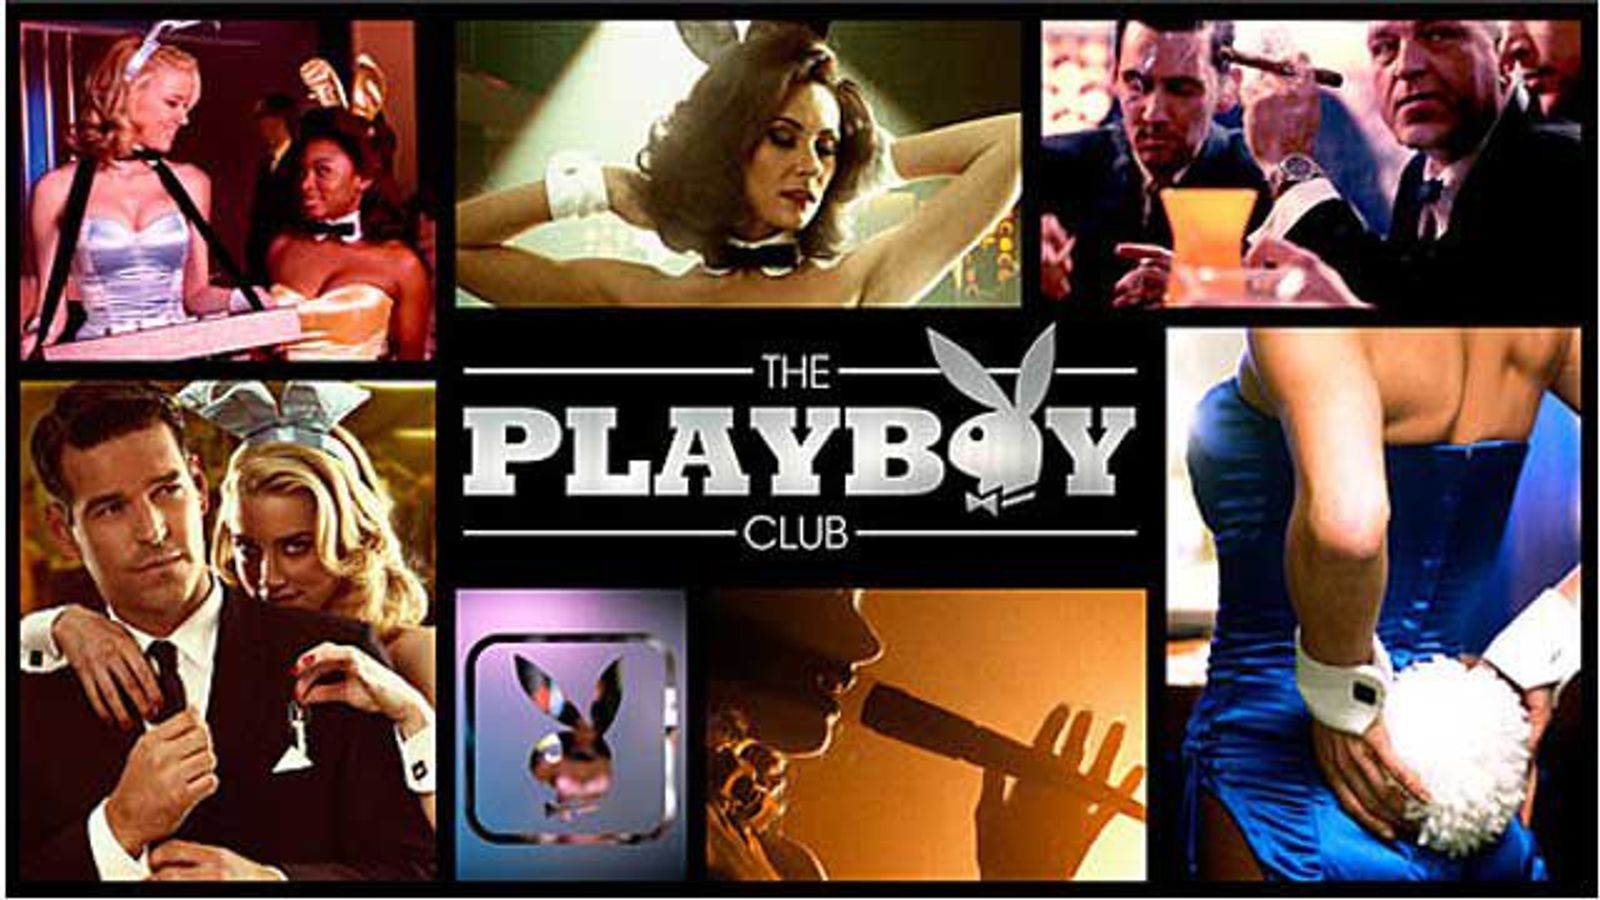 MiM, Others Naively Label NBC’s ‘The Playboy Club’ as Porn